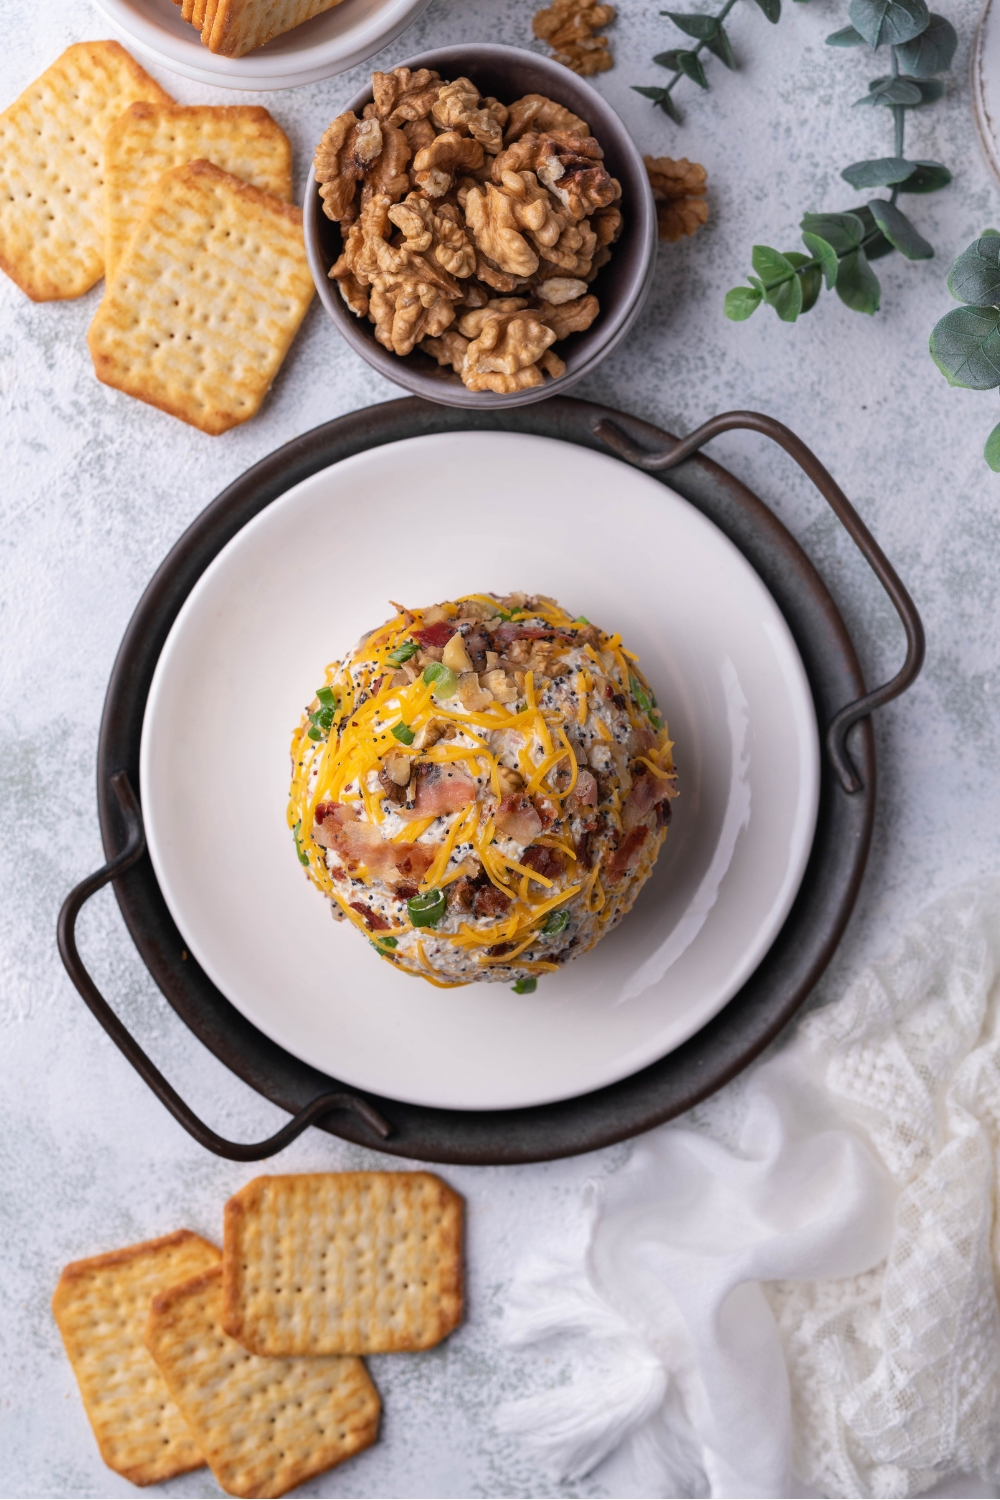 Overview of a cheese ball on a white plate layered with a serving tray. The cheese ball is surrounded by crackers and a bowl of chopped nuts.